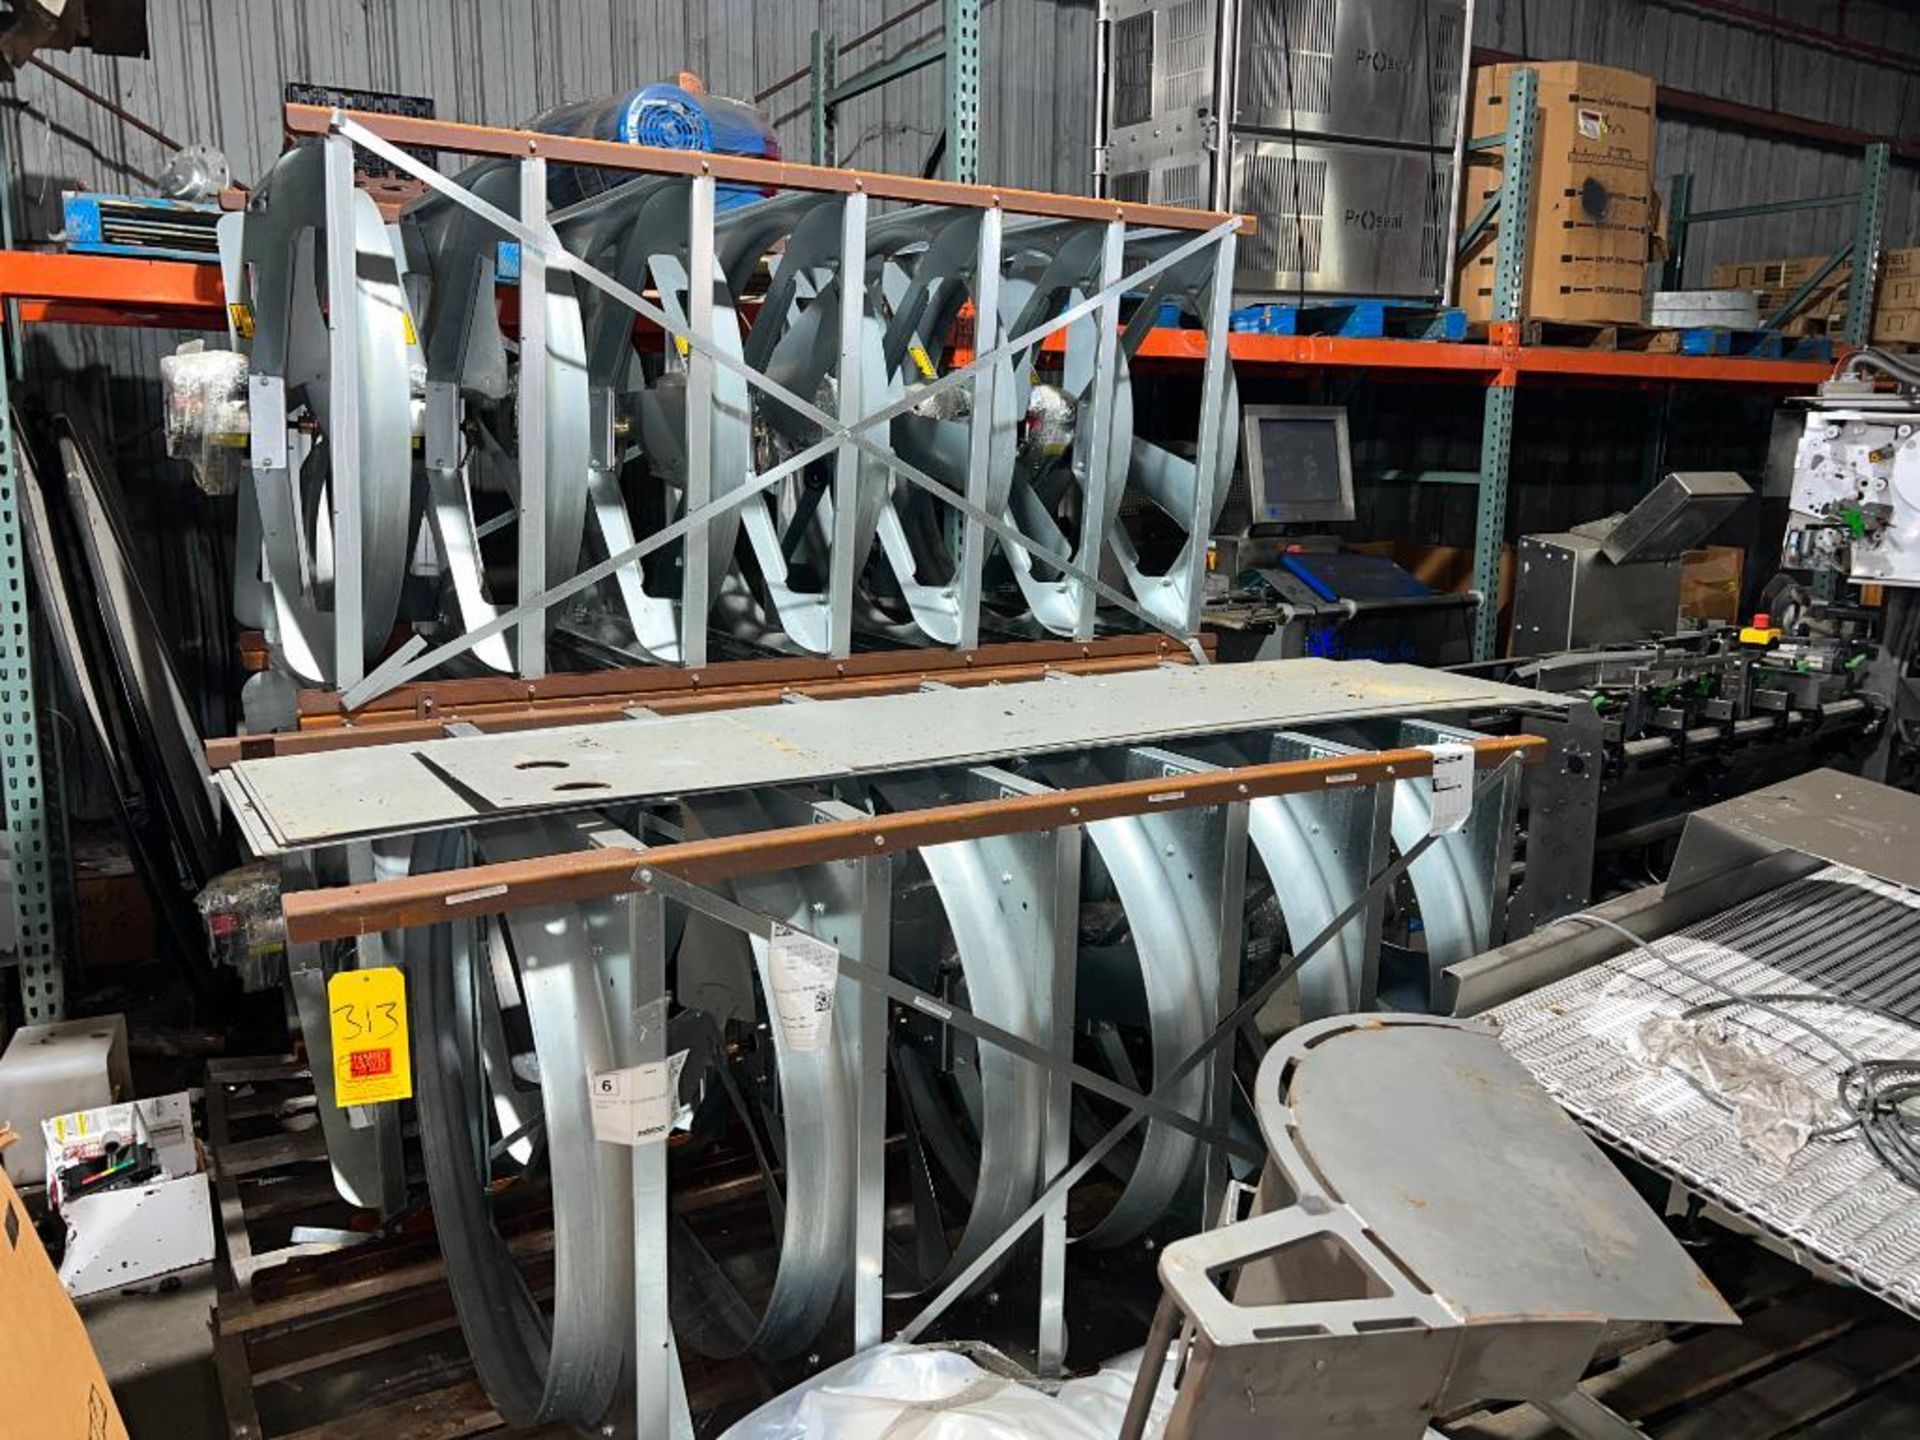 J&D Manufacturing 36" Panel Fan, Dimensions= 7' x 39" - Rigging Fee: $400